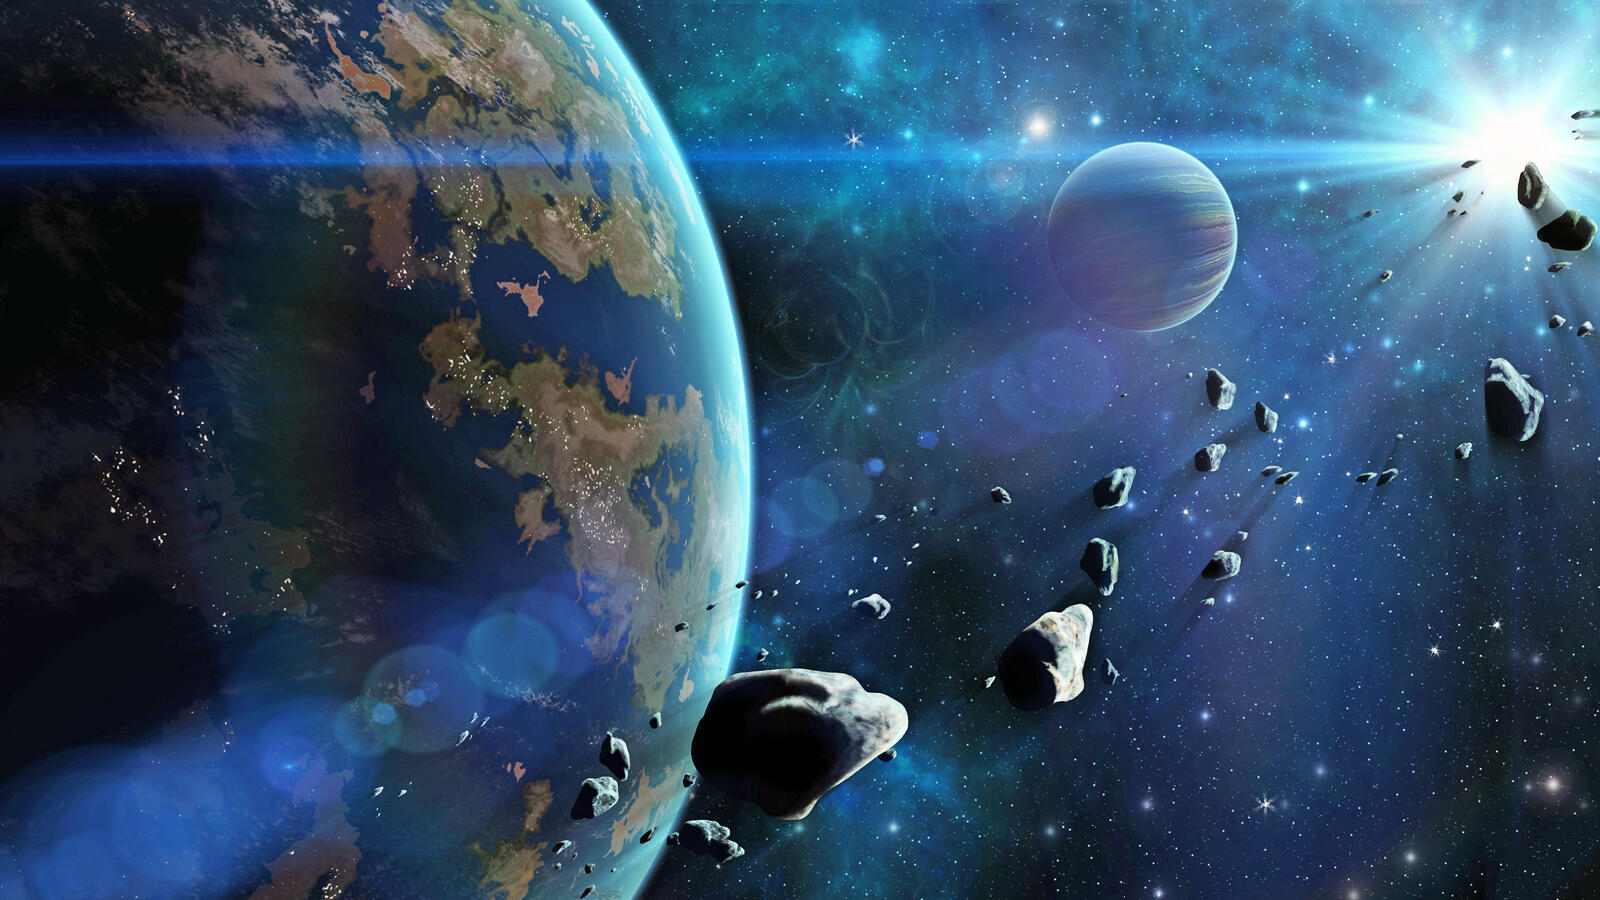 Wallpapers space planets asteroids on the desktop